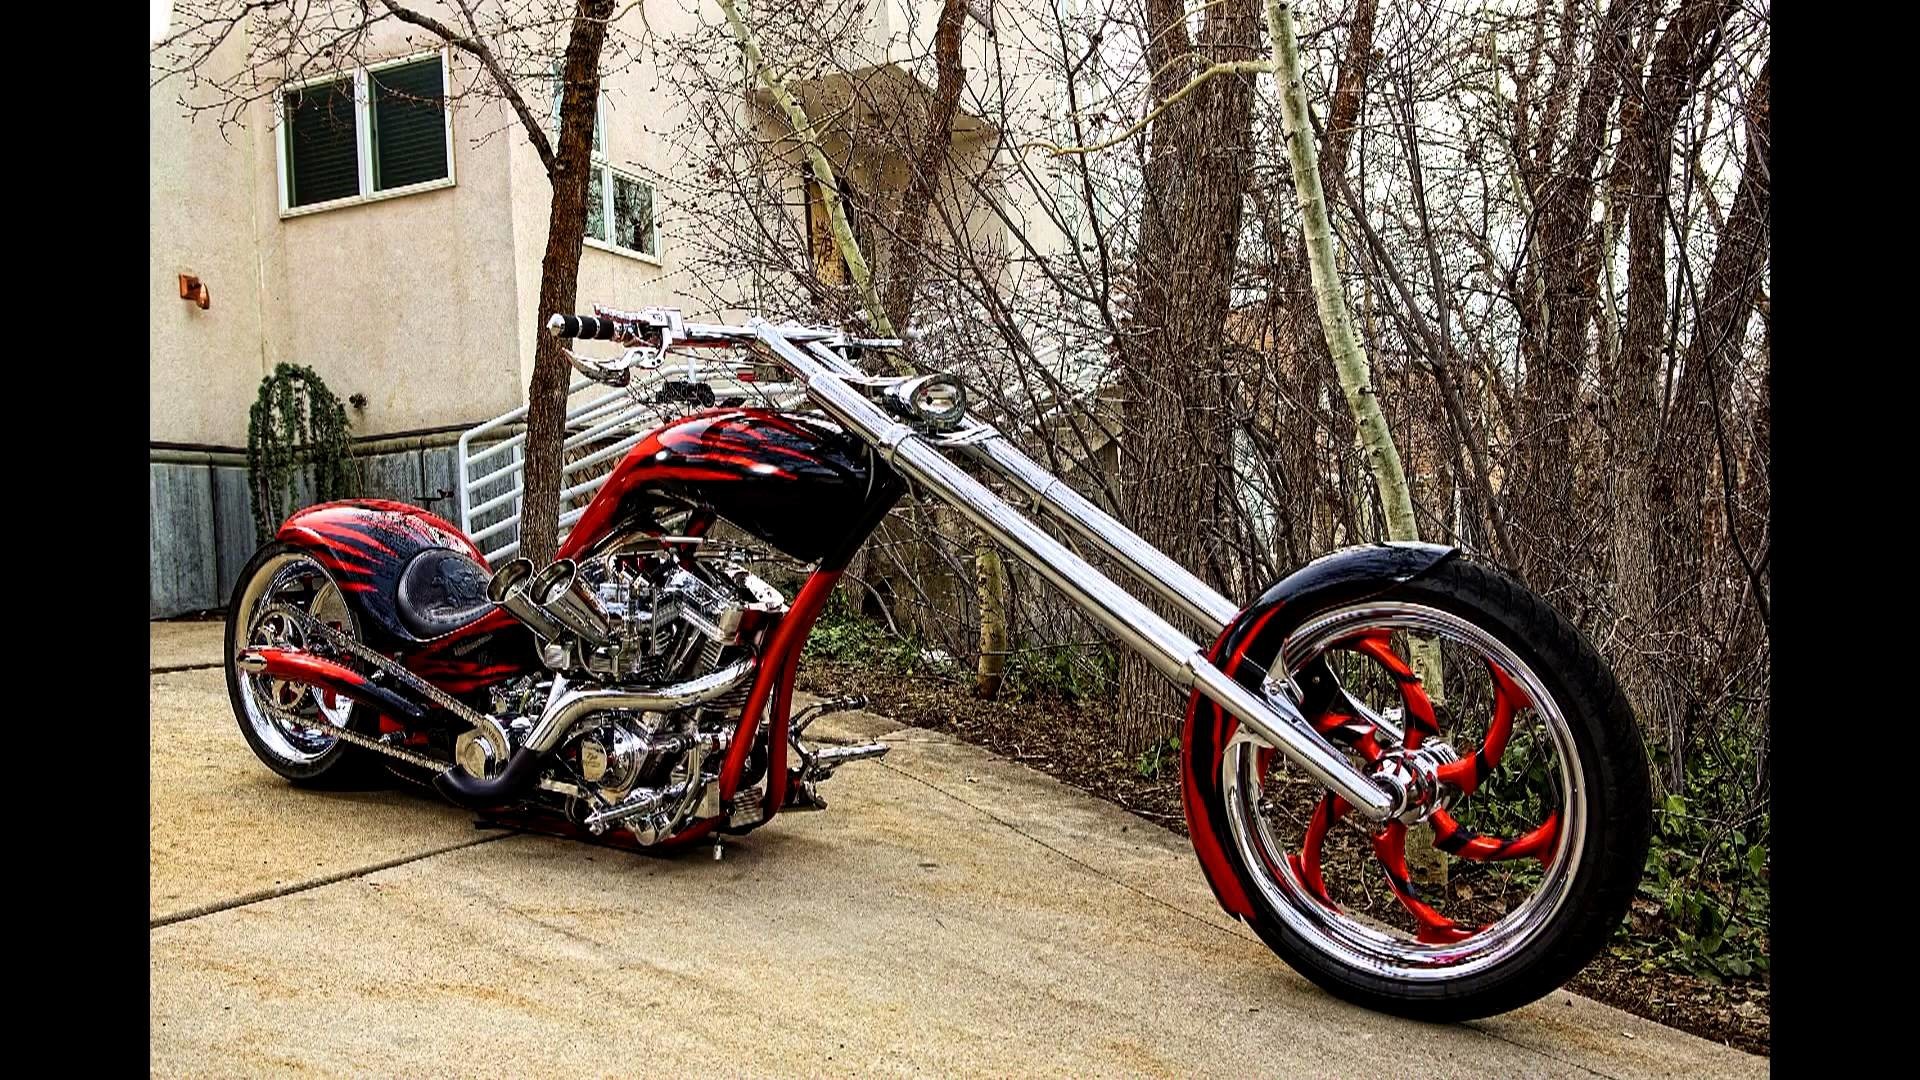 1920x1080 Chopper Wallpaper For Desktop, Laptop and Mobiles. Here You Can Download  More than 5 Million Photography collections Uploaded By Users.